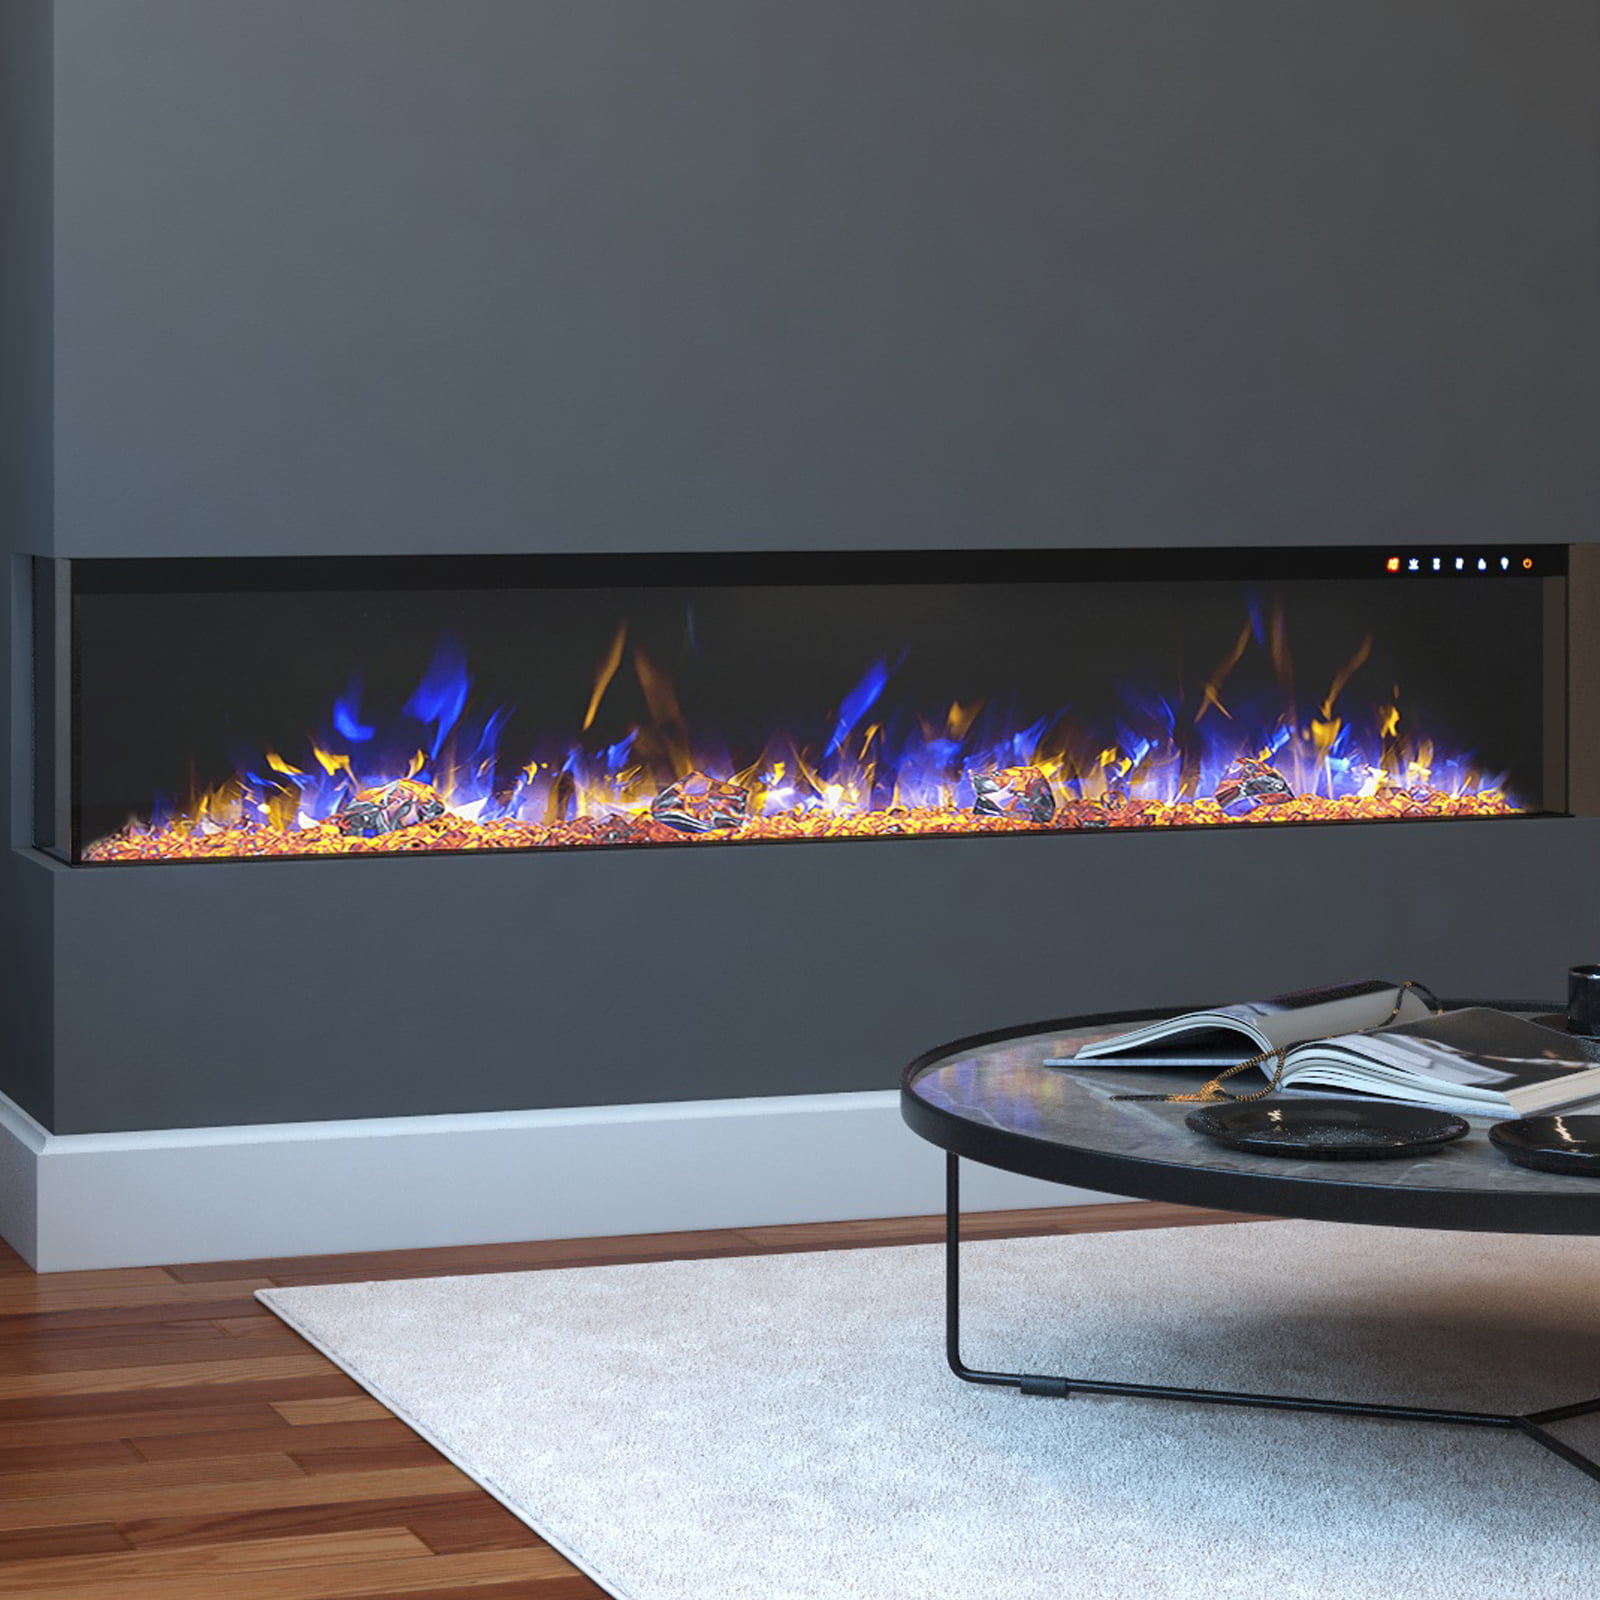 Regal Flame 60" Spectrum Modern Linear Electric 3 Sided Wall Mounted Built-in Recessed Fireplace